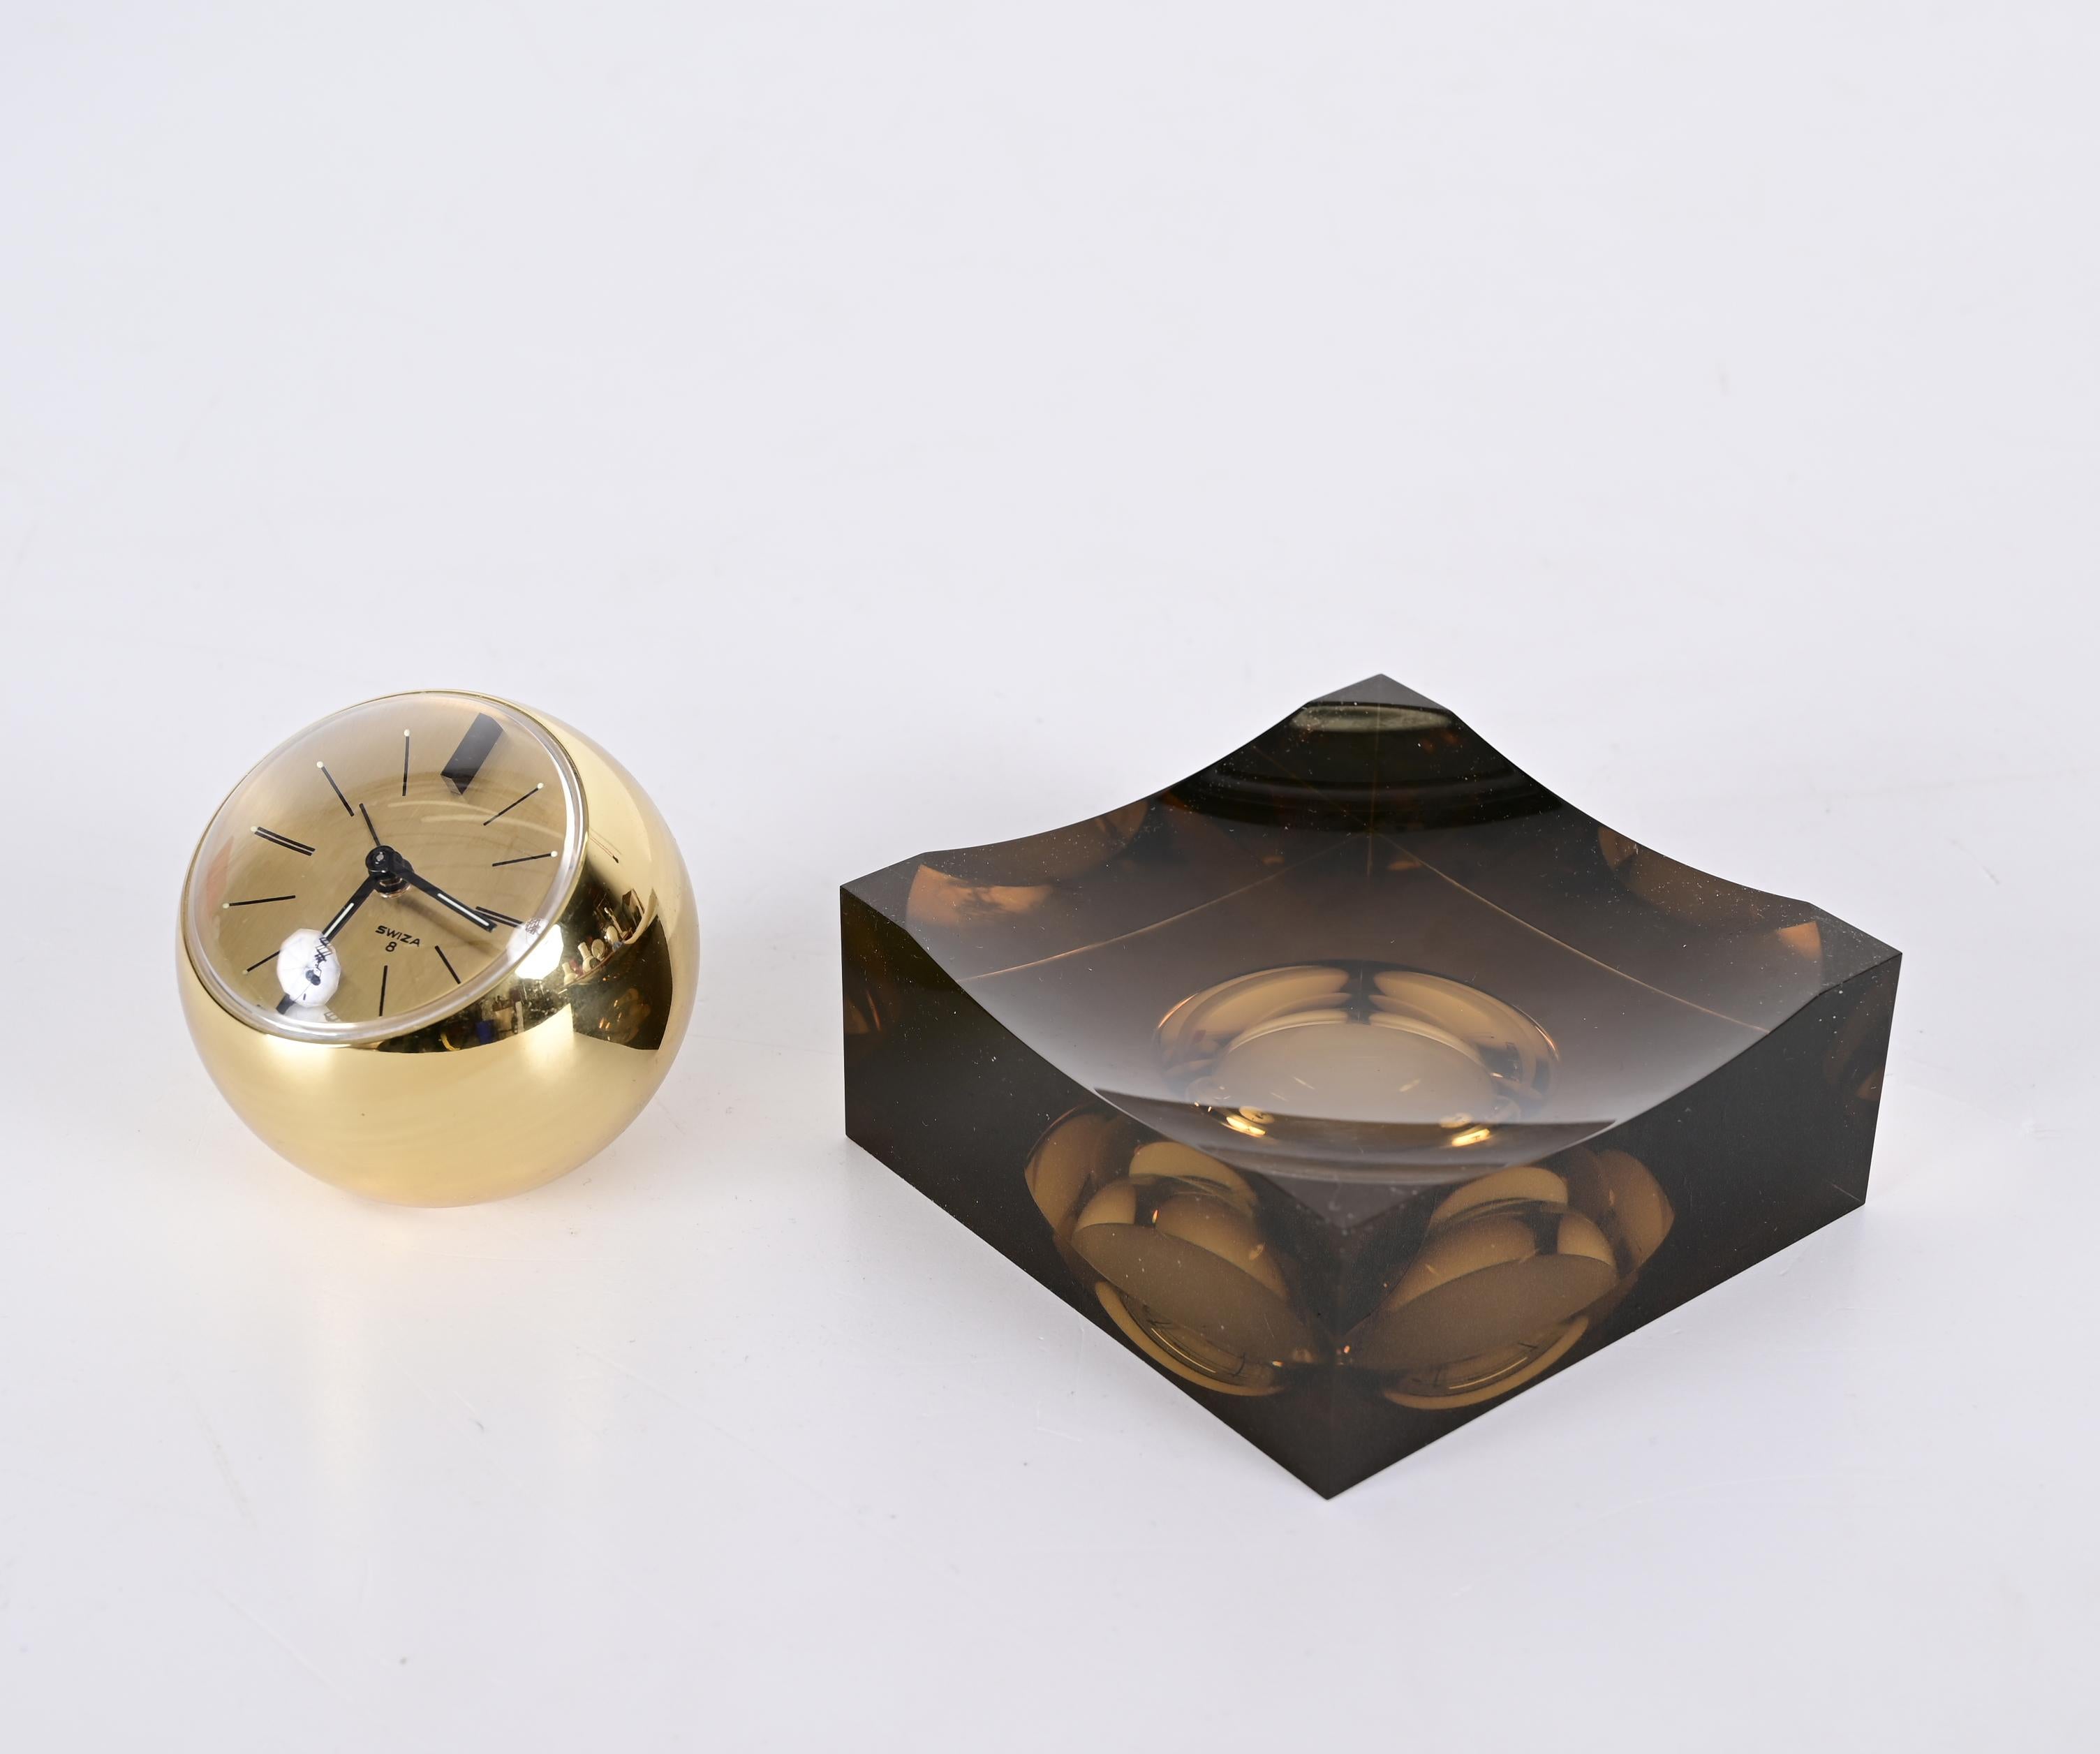 Swiza 8 Day Rare Gilt Sphere Clock with Smoked Lucite Base, Box and Guarantee For Sale 10